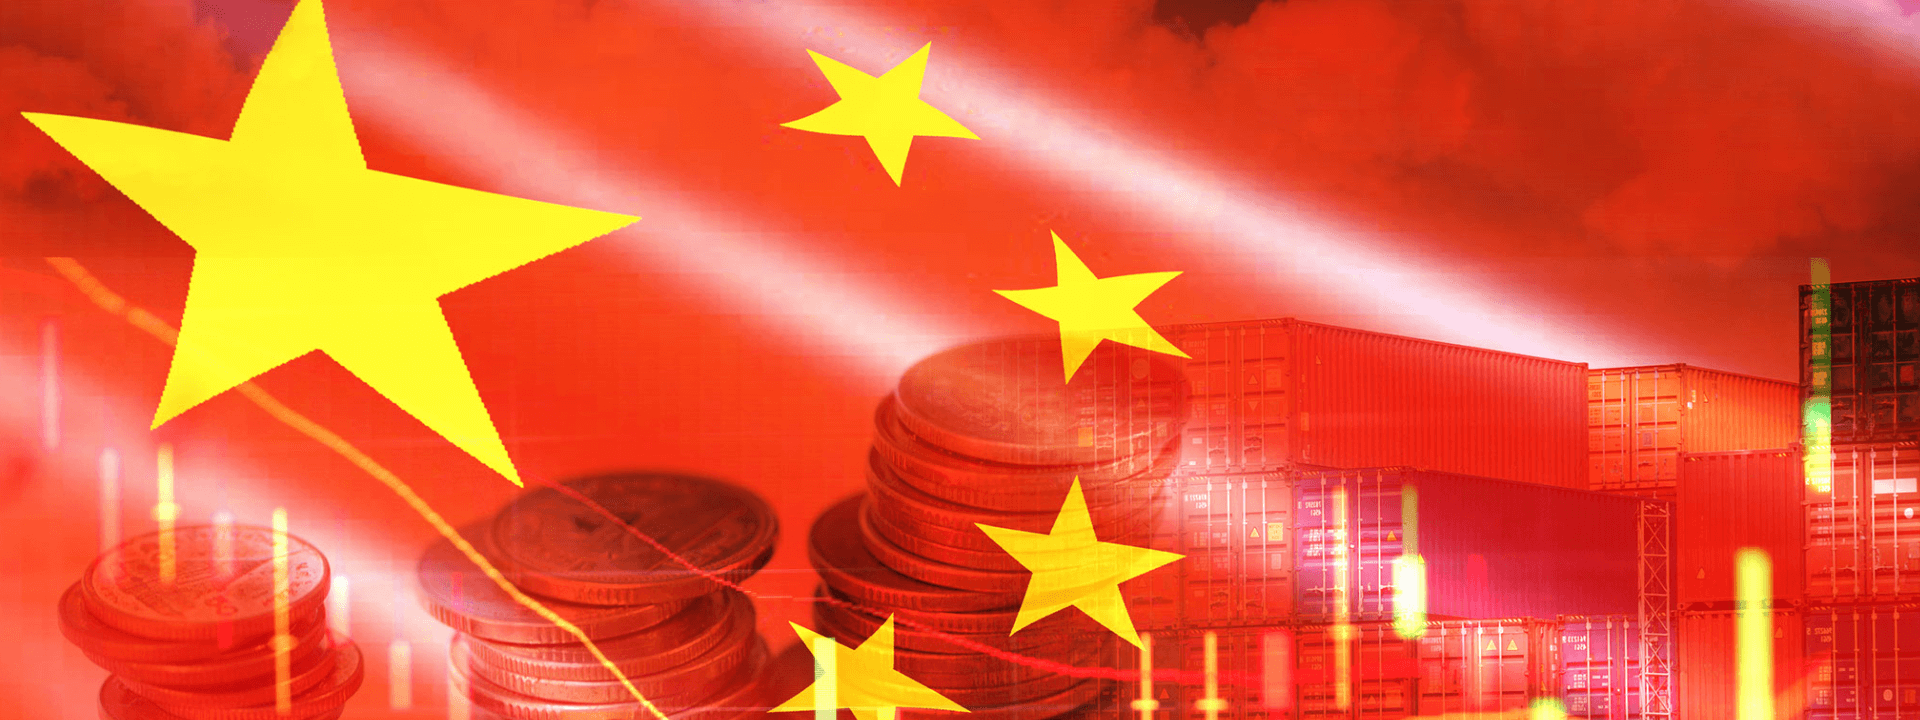 New Rules for China’s $3 Trillion Private Fund Industry Have More Teeth, Experts Say